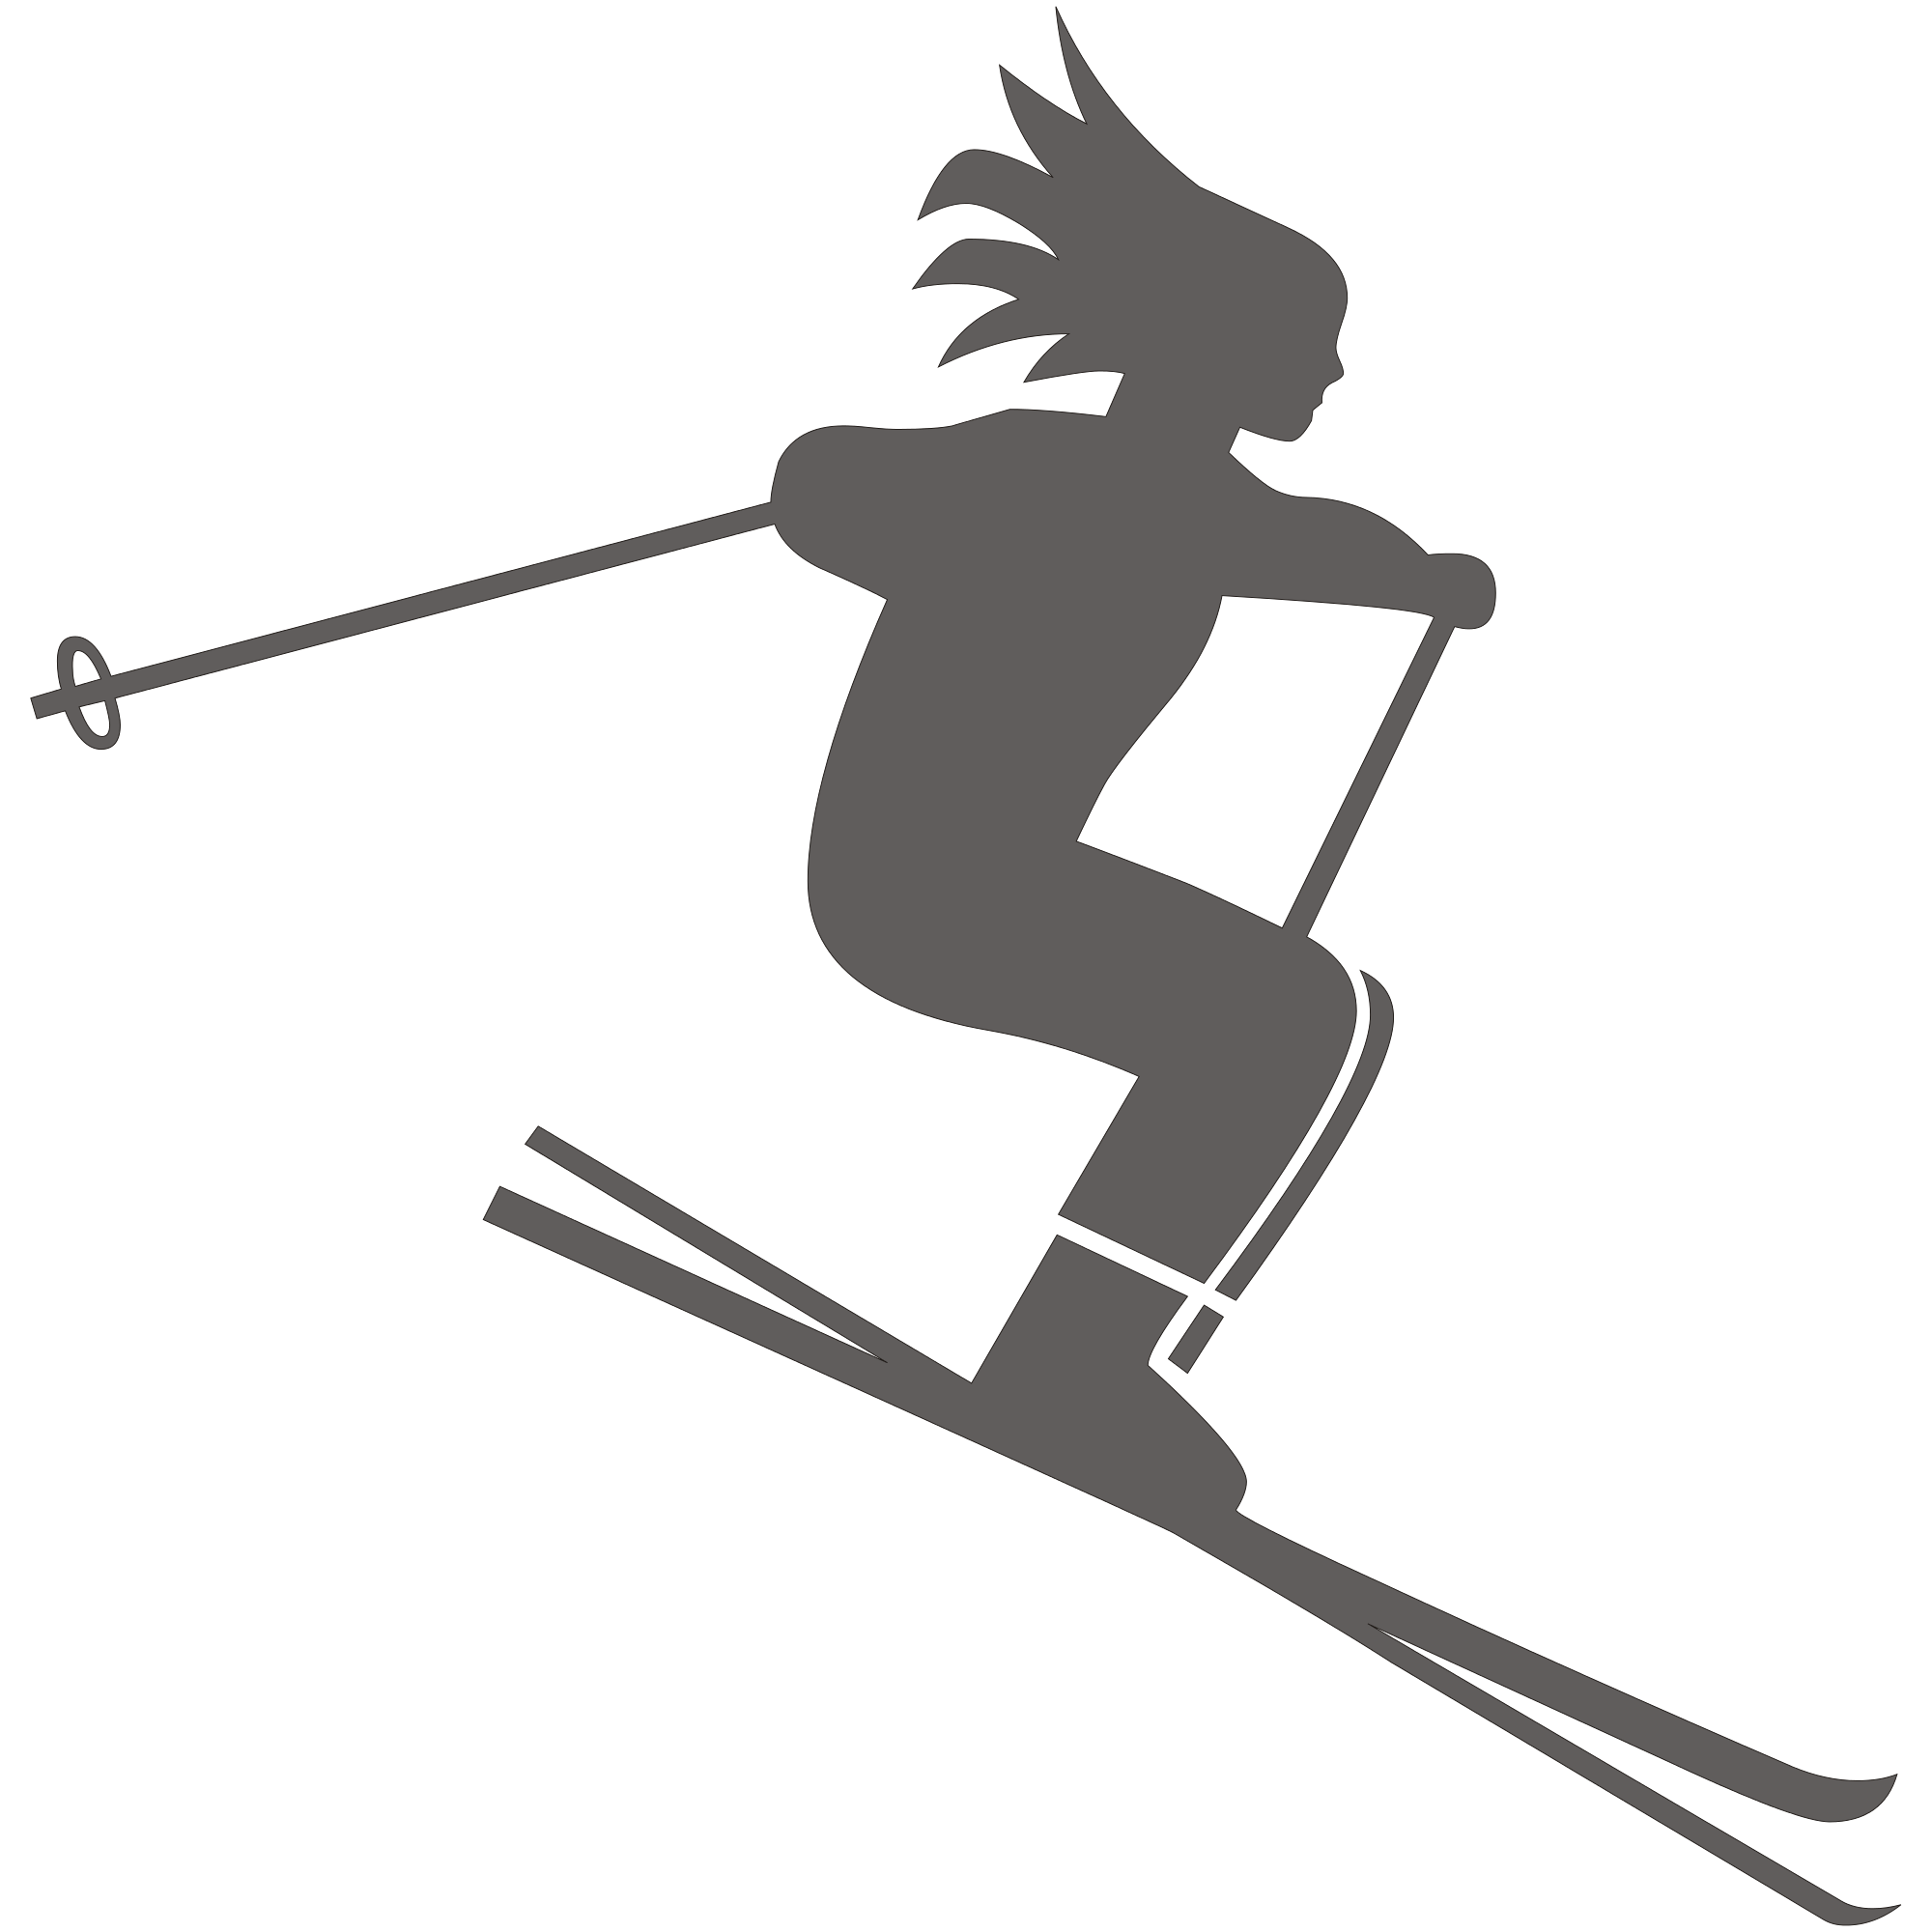 skis clipart svg